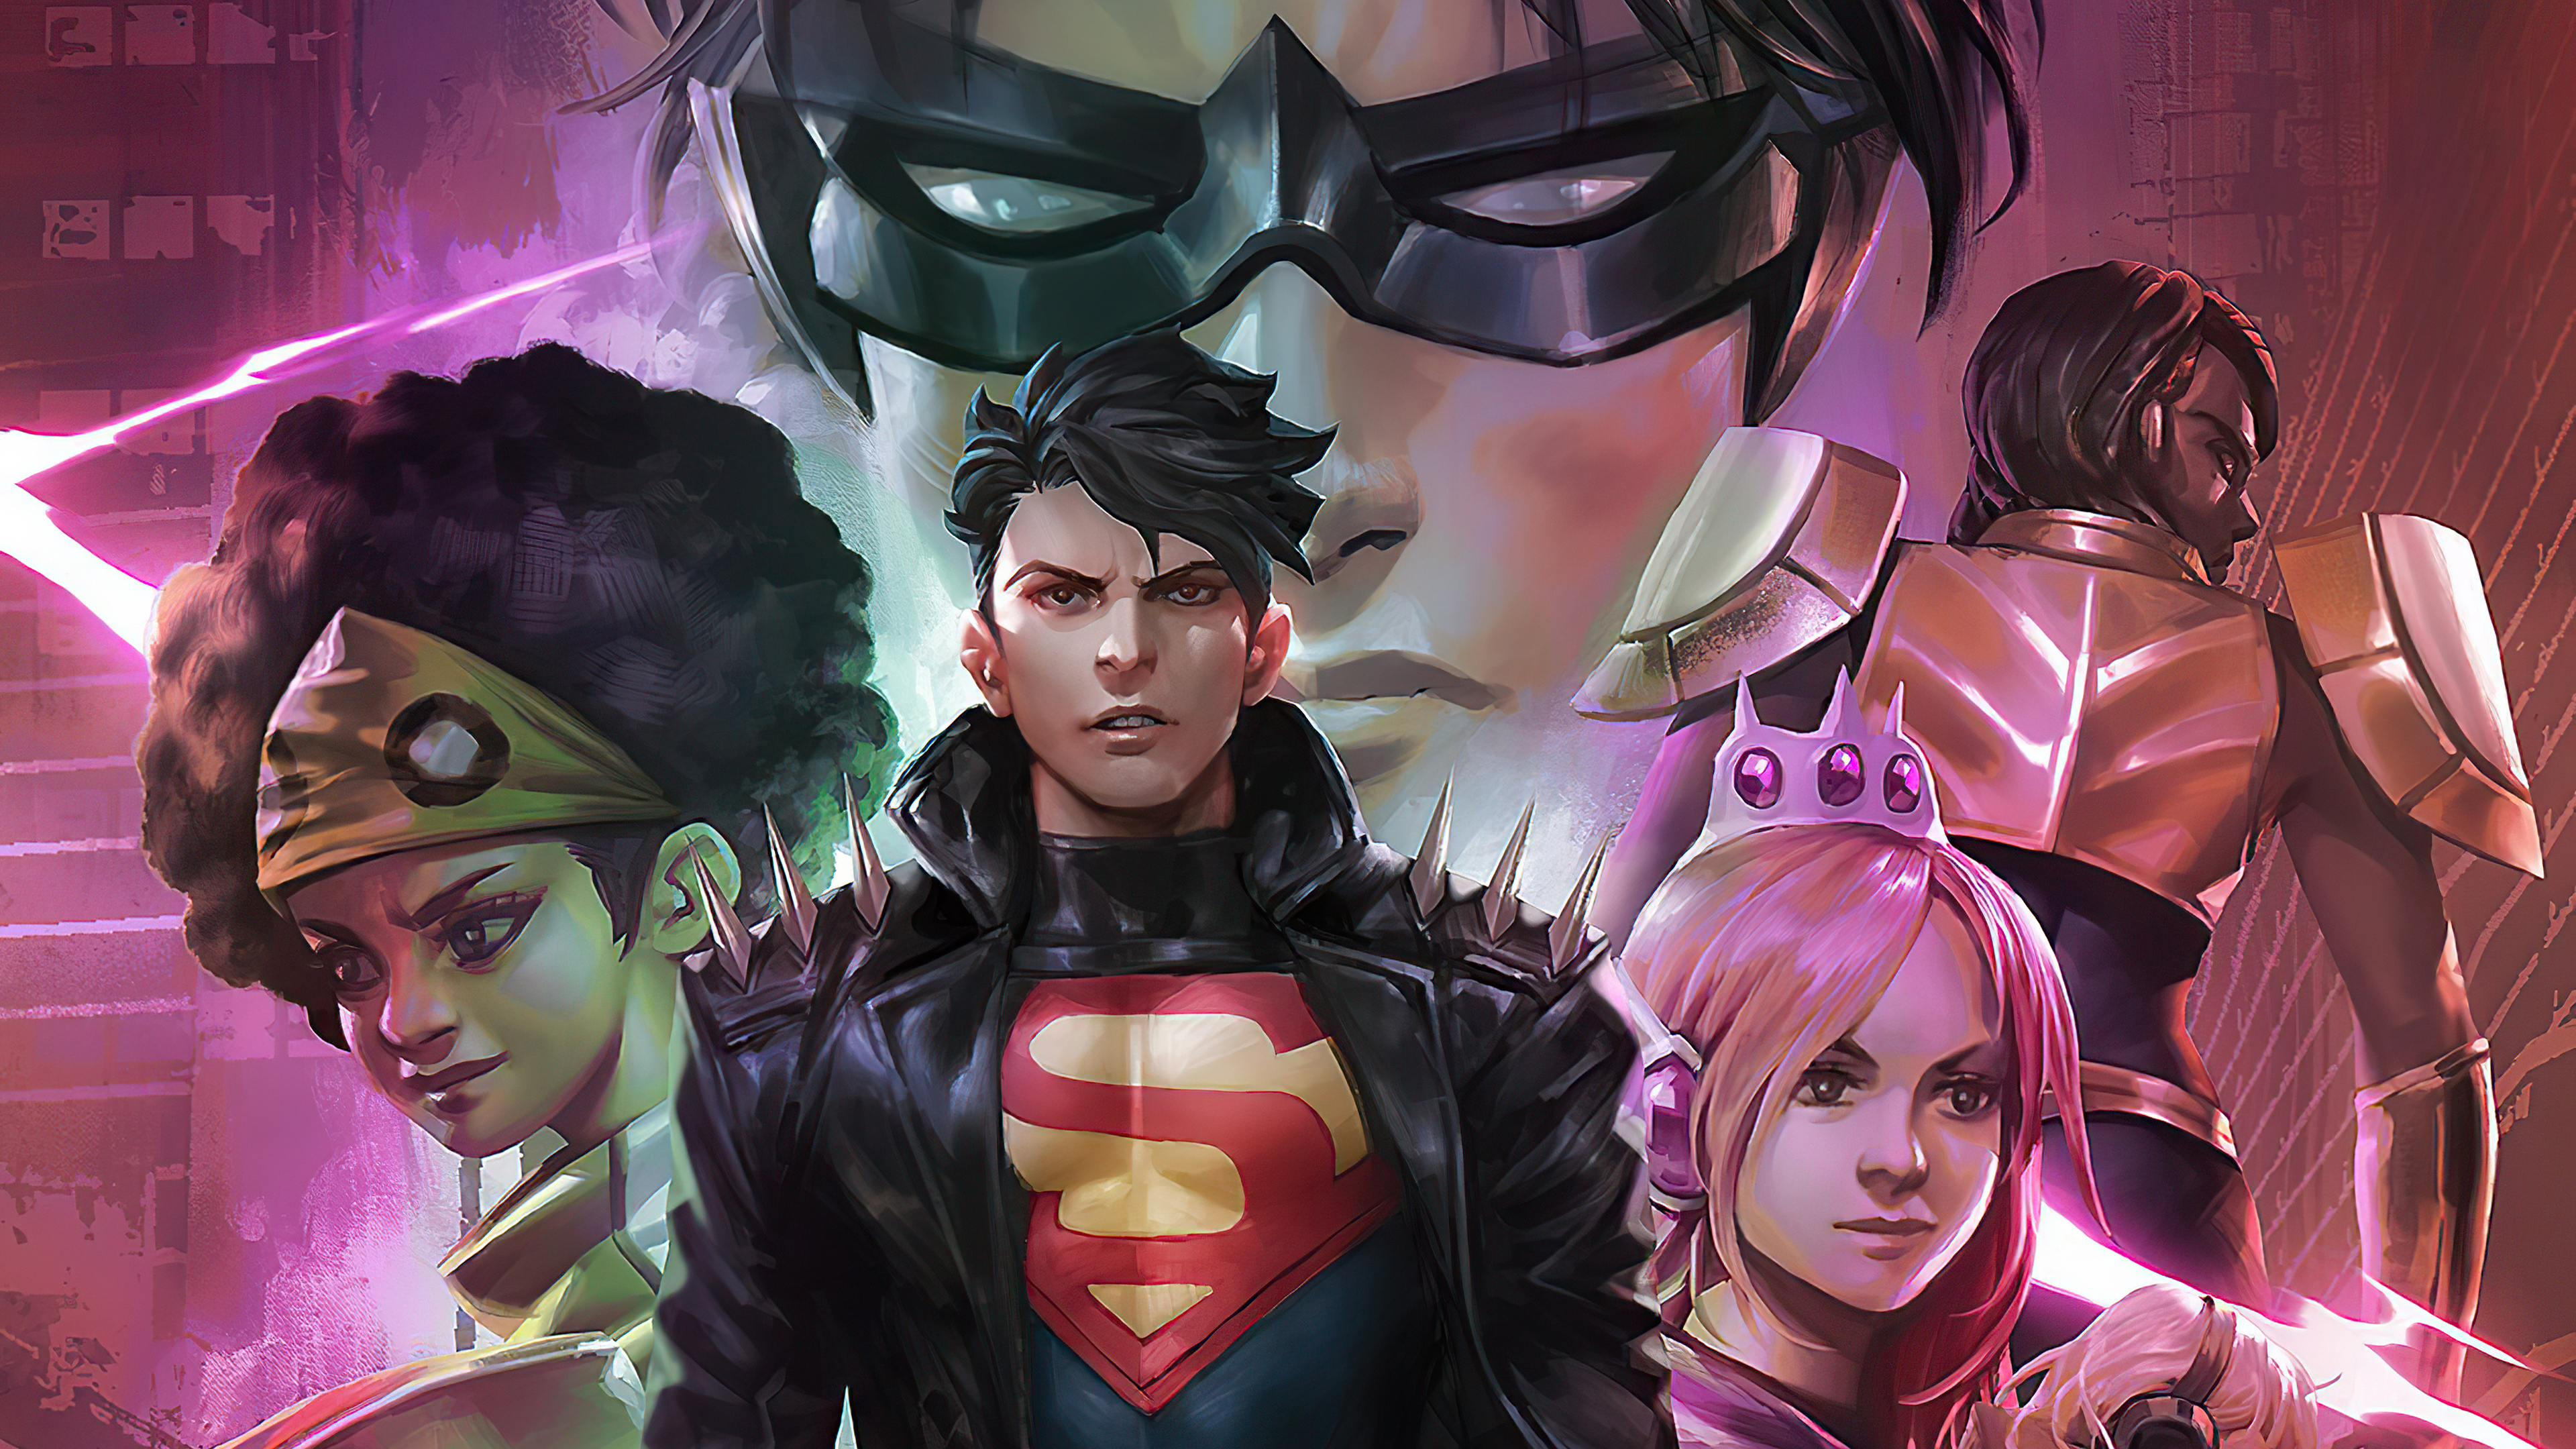 3840x2160 Dccomics Youngjustice Superboy Robin Impulse Jeenyhex Teenlantern Naomi Wondergirl Amythest, HD Superheroes, 4k Wallpapers, Images, Backgrounds, Photos and Pictures